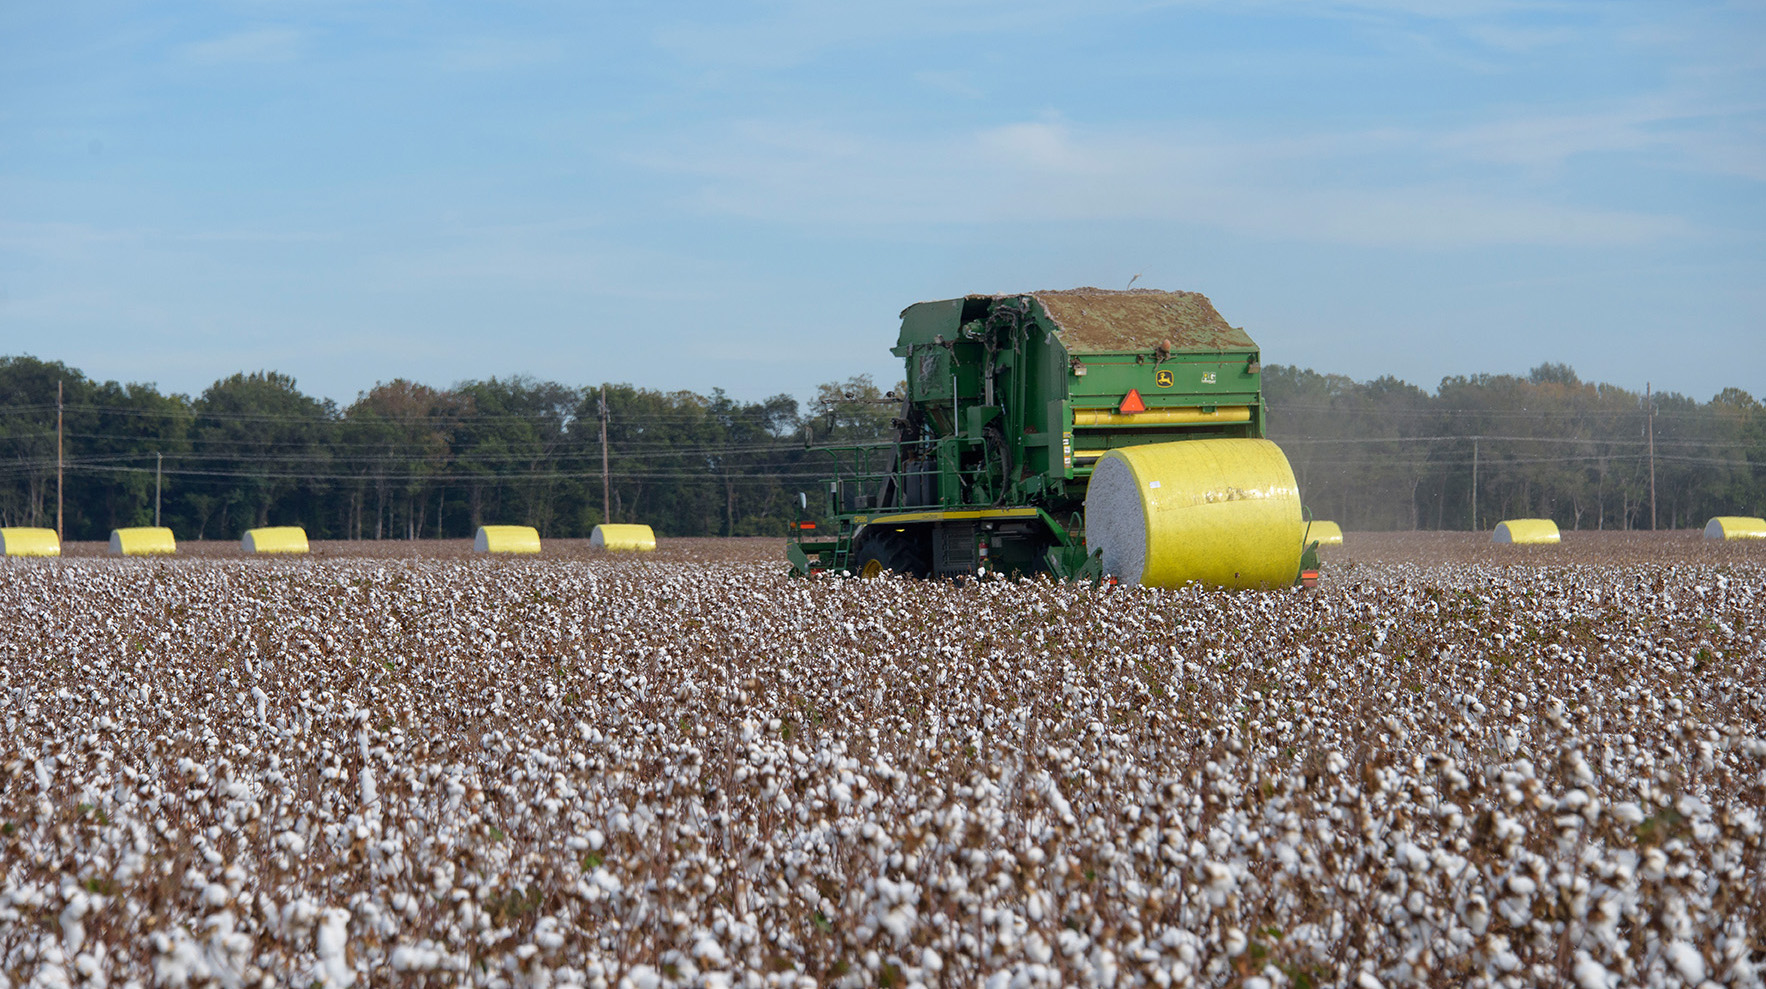 A cotton baler drops a yellow-wrapped, round cotton bale in a cotton field.